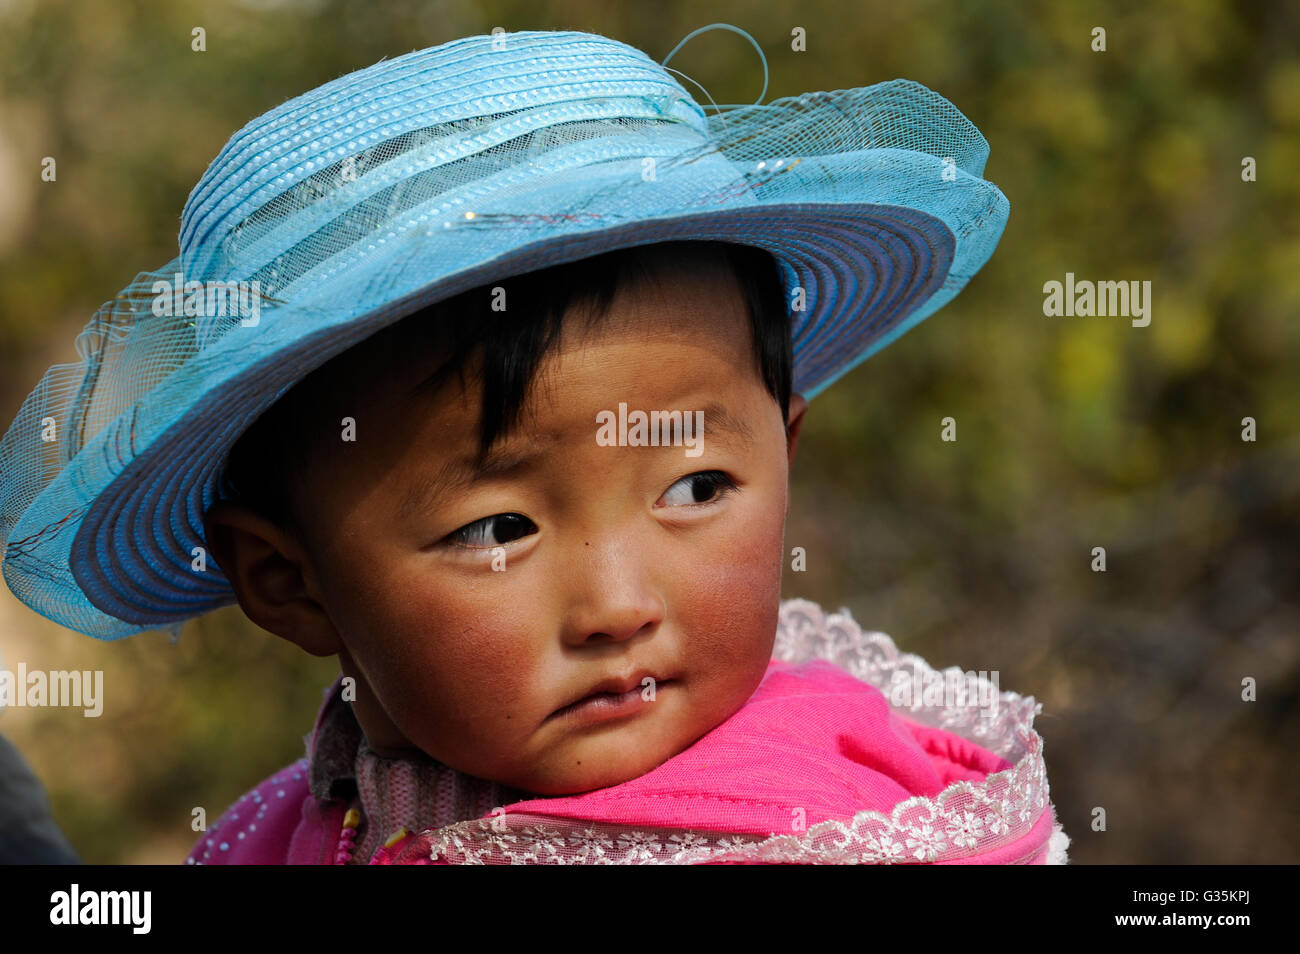 CHINA Yunnan Lugu Lake , ethnic minority Mosuo who are buddhist and women have a matriarch, matriarchal society, child with blue hat Stock Photo